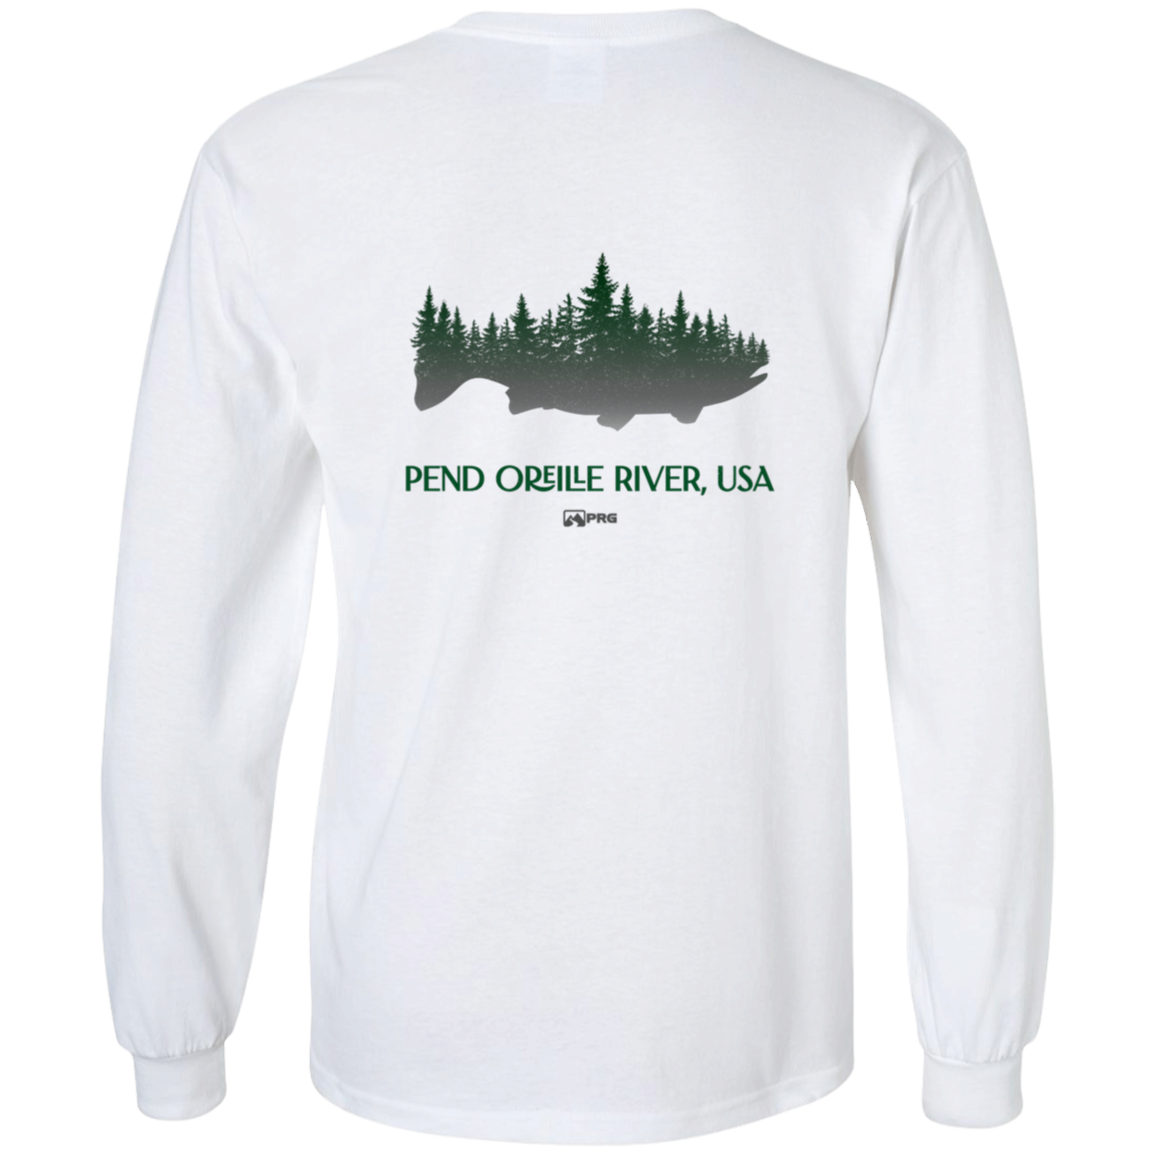 Forests & Fish (Front & Back) - Long Sleeve